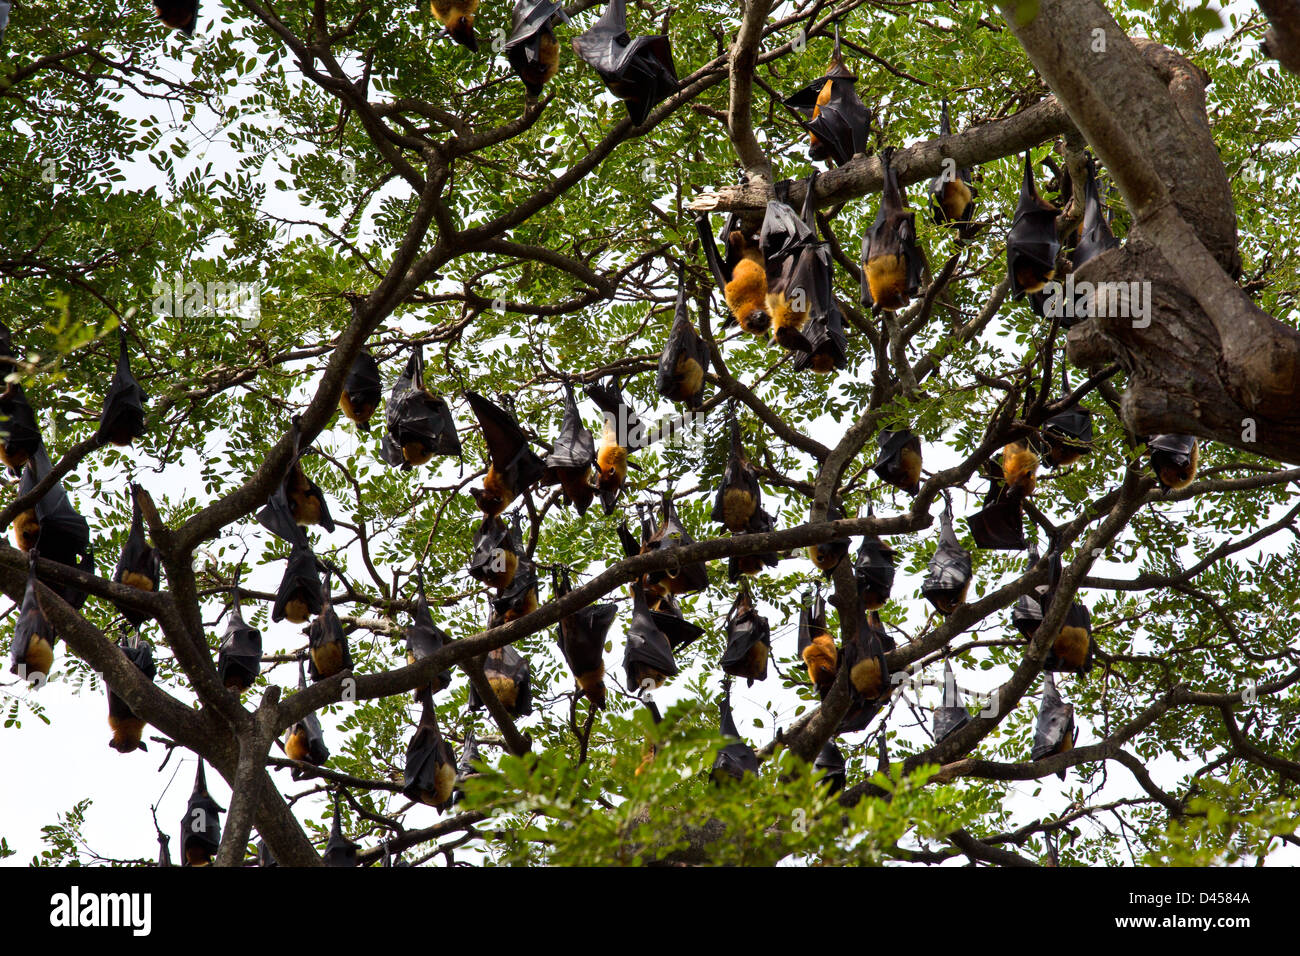 HUNDREDS OF FLYING FOXES ROOSTING ON TREE BRANCHES DURING DAYLIGHT HOURS SOUTHERN SRI LANKA Stock Photo